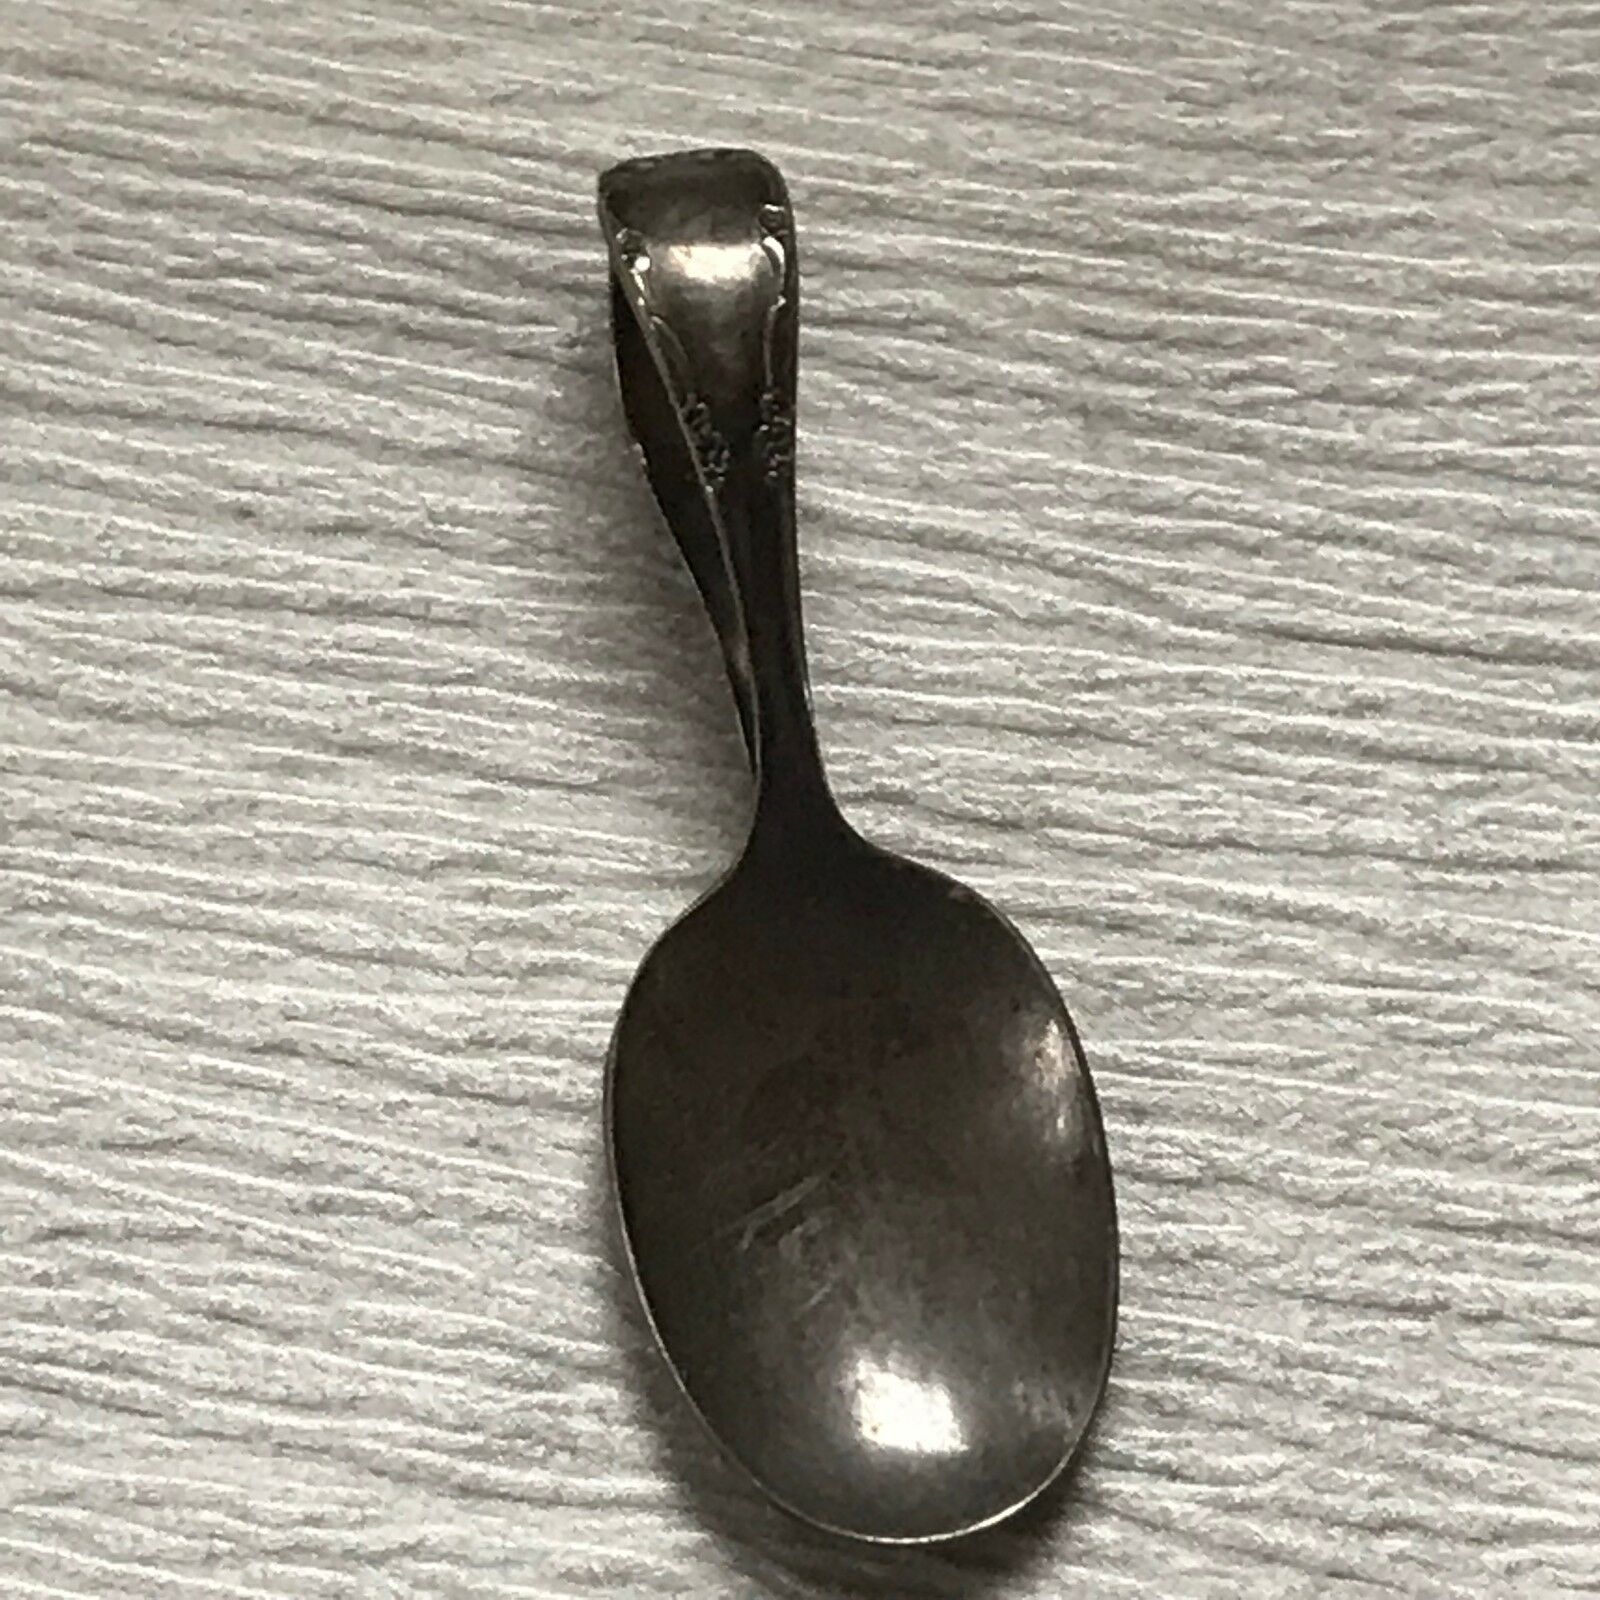 Primary image for Vintage Community Marked Dainty Floral Nonmagnetic Silver Baby Spoon with Looped